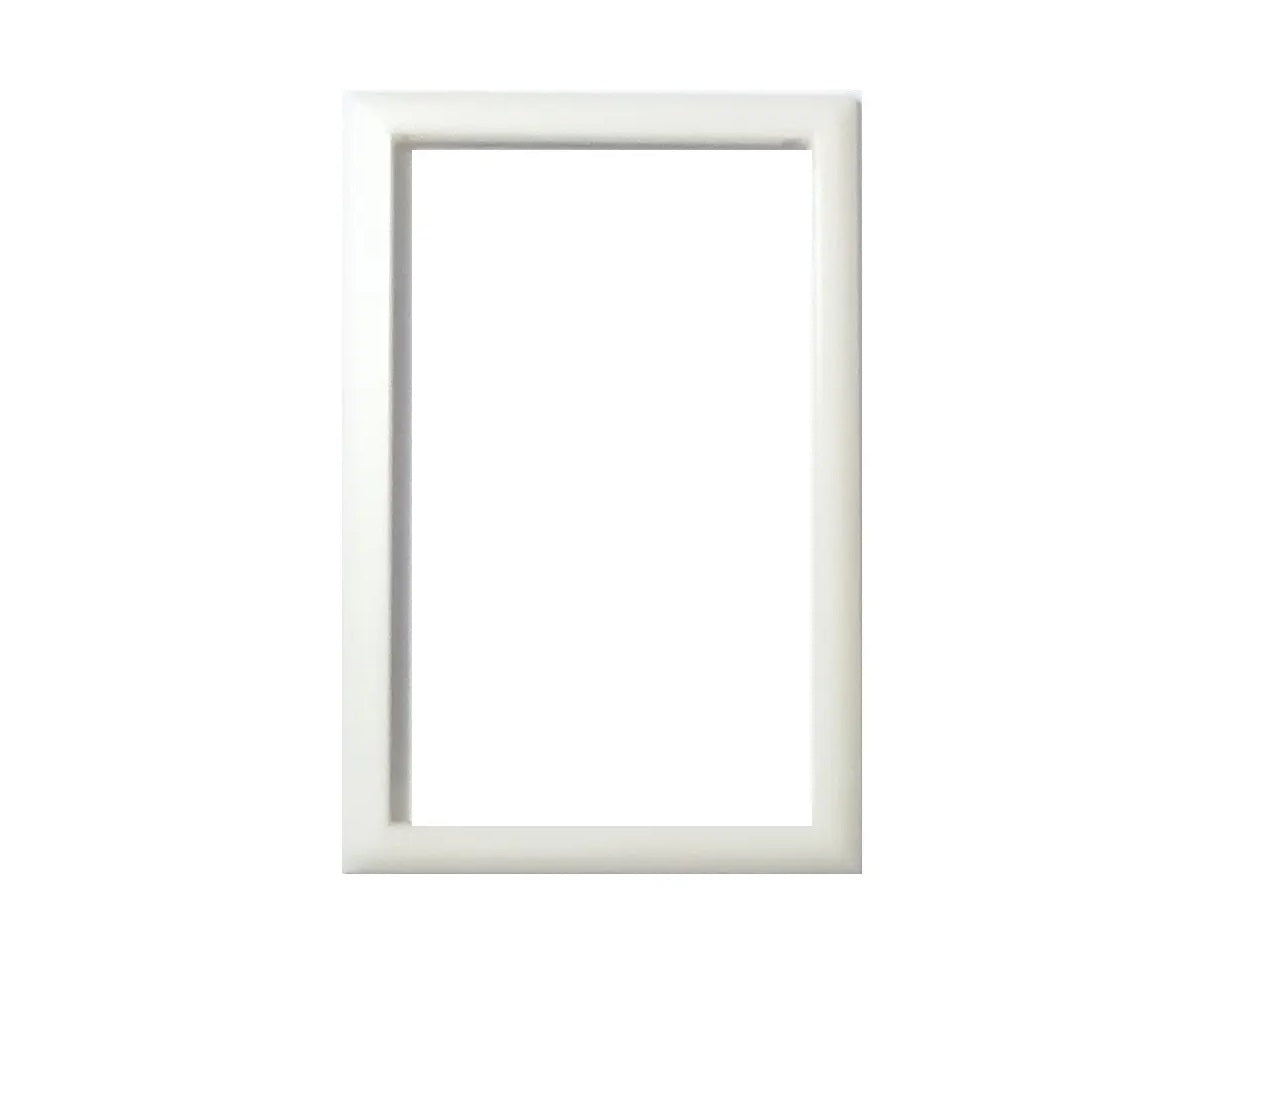 Border/Frame for Sonoff Light switches (White) 3D printed - Elite Renewable Solutions